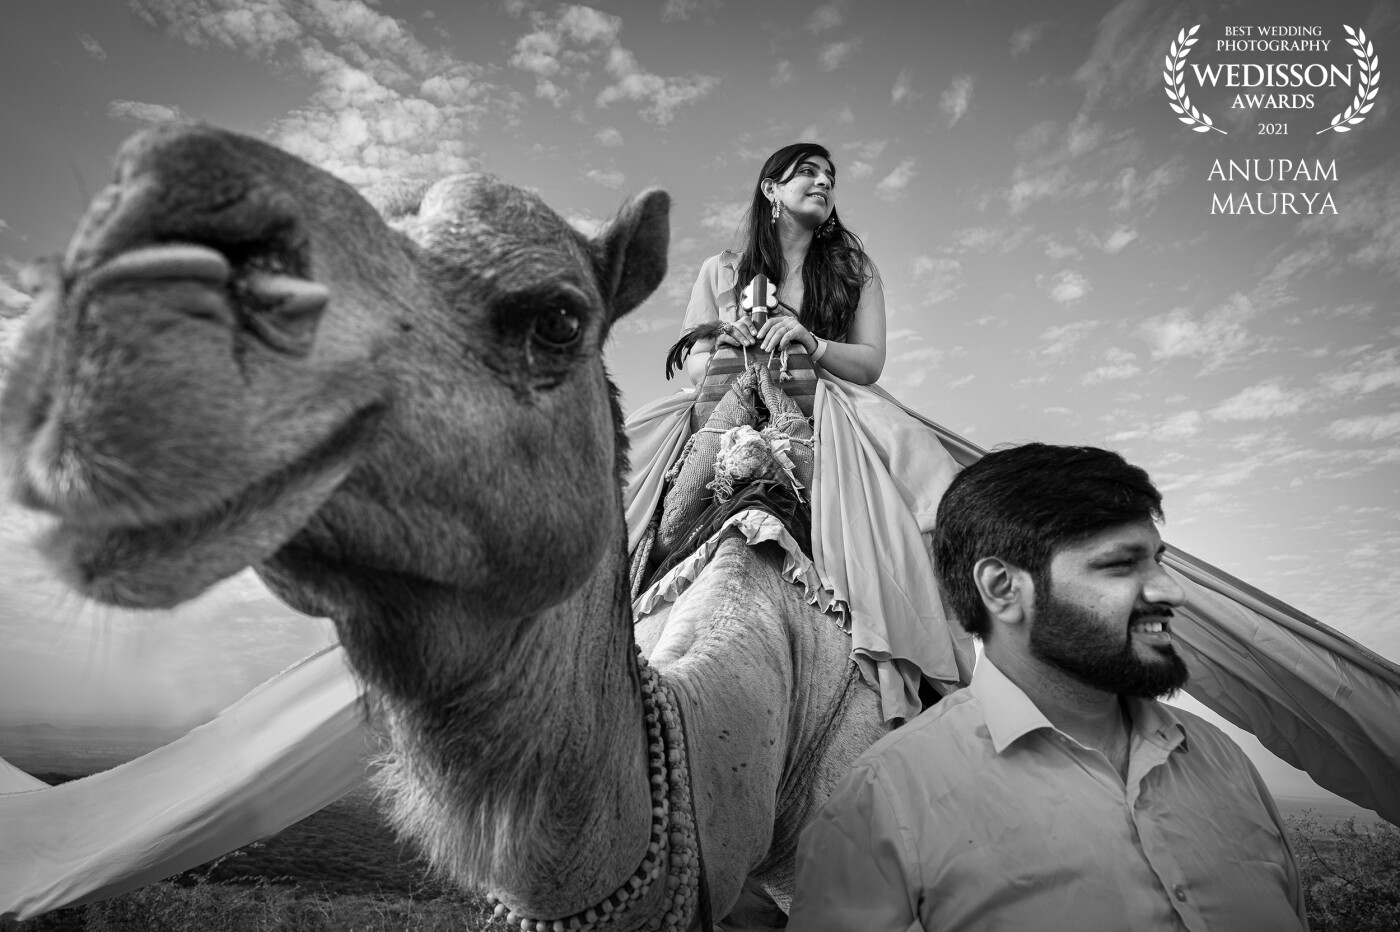 We call this picture - Triangle of Smiles. Jay & Hitali's couple shoot had many gems and this is surely one of our favorites. This was a beautiful moment in the desert. 